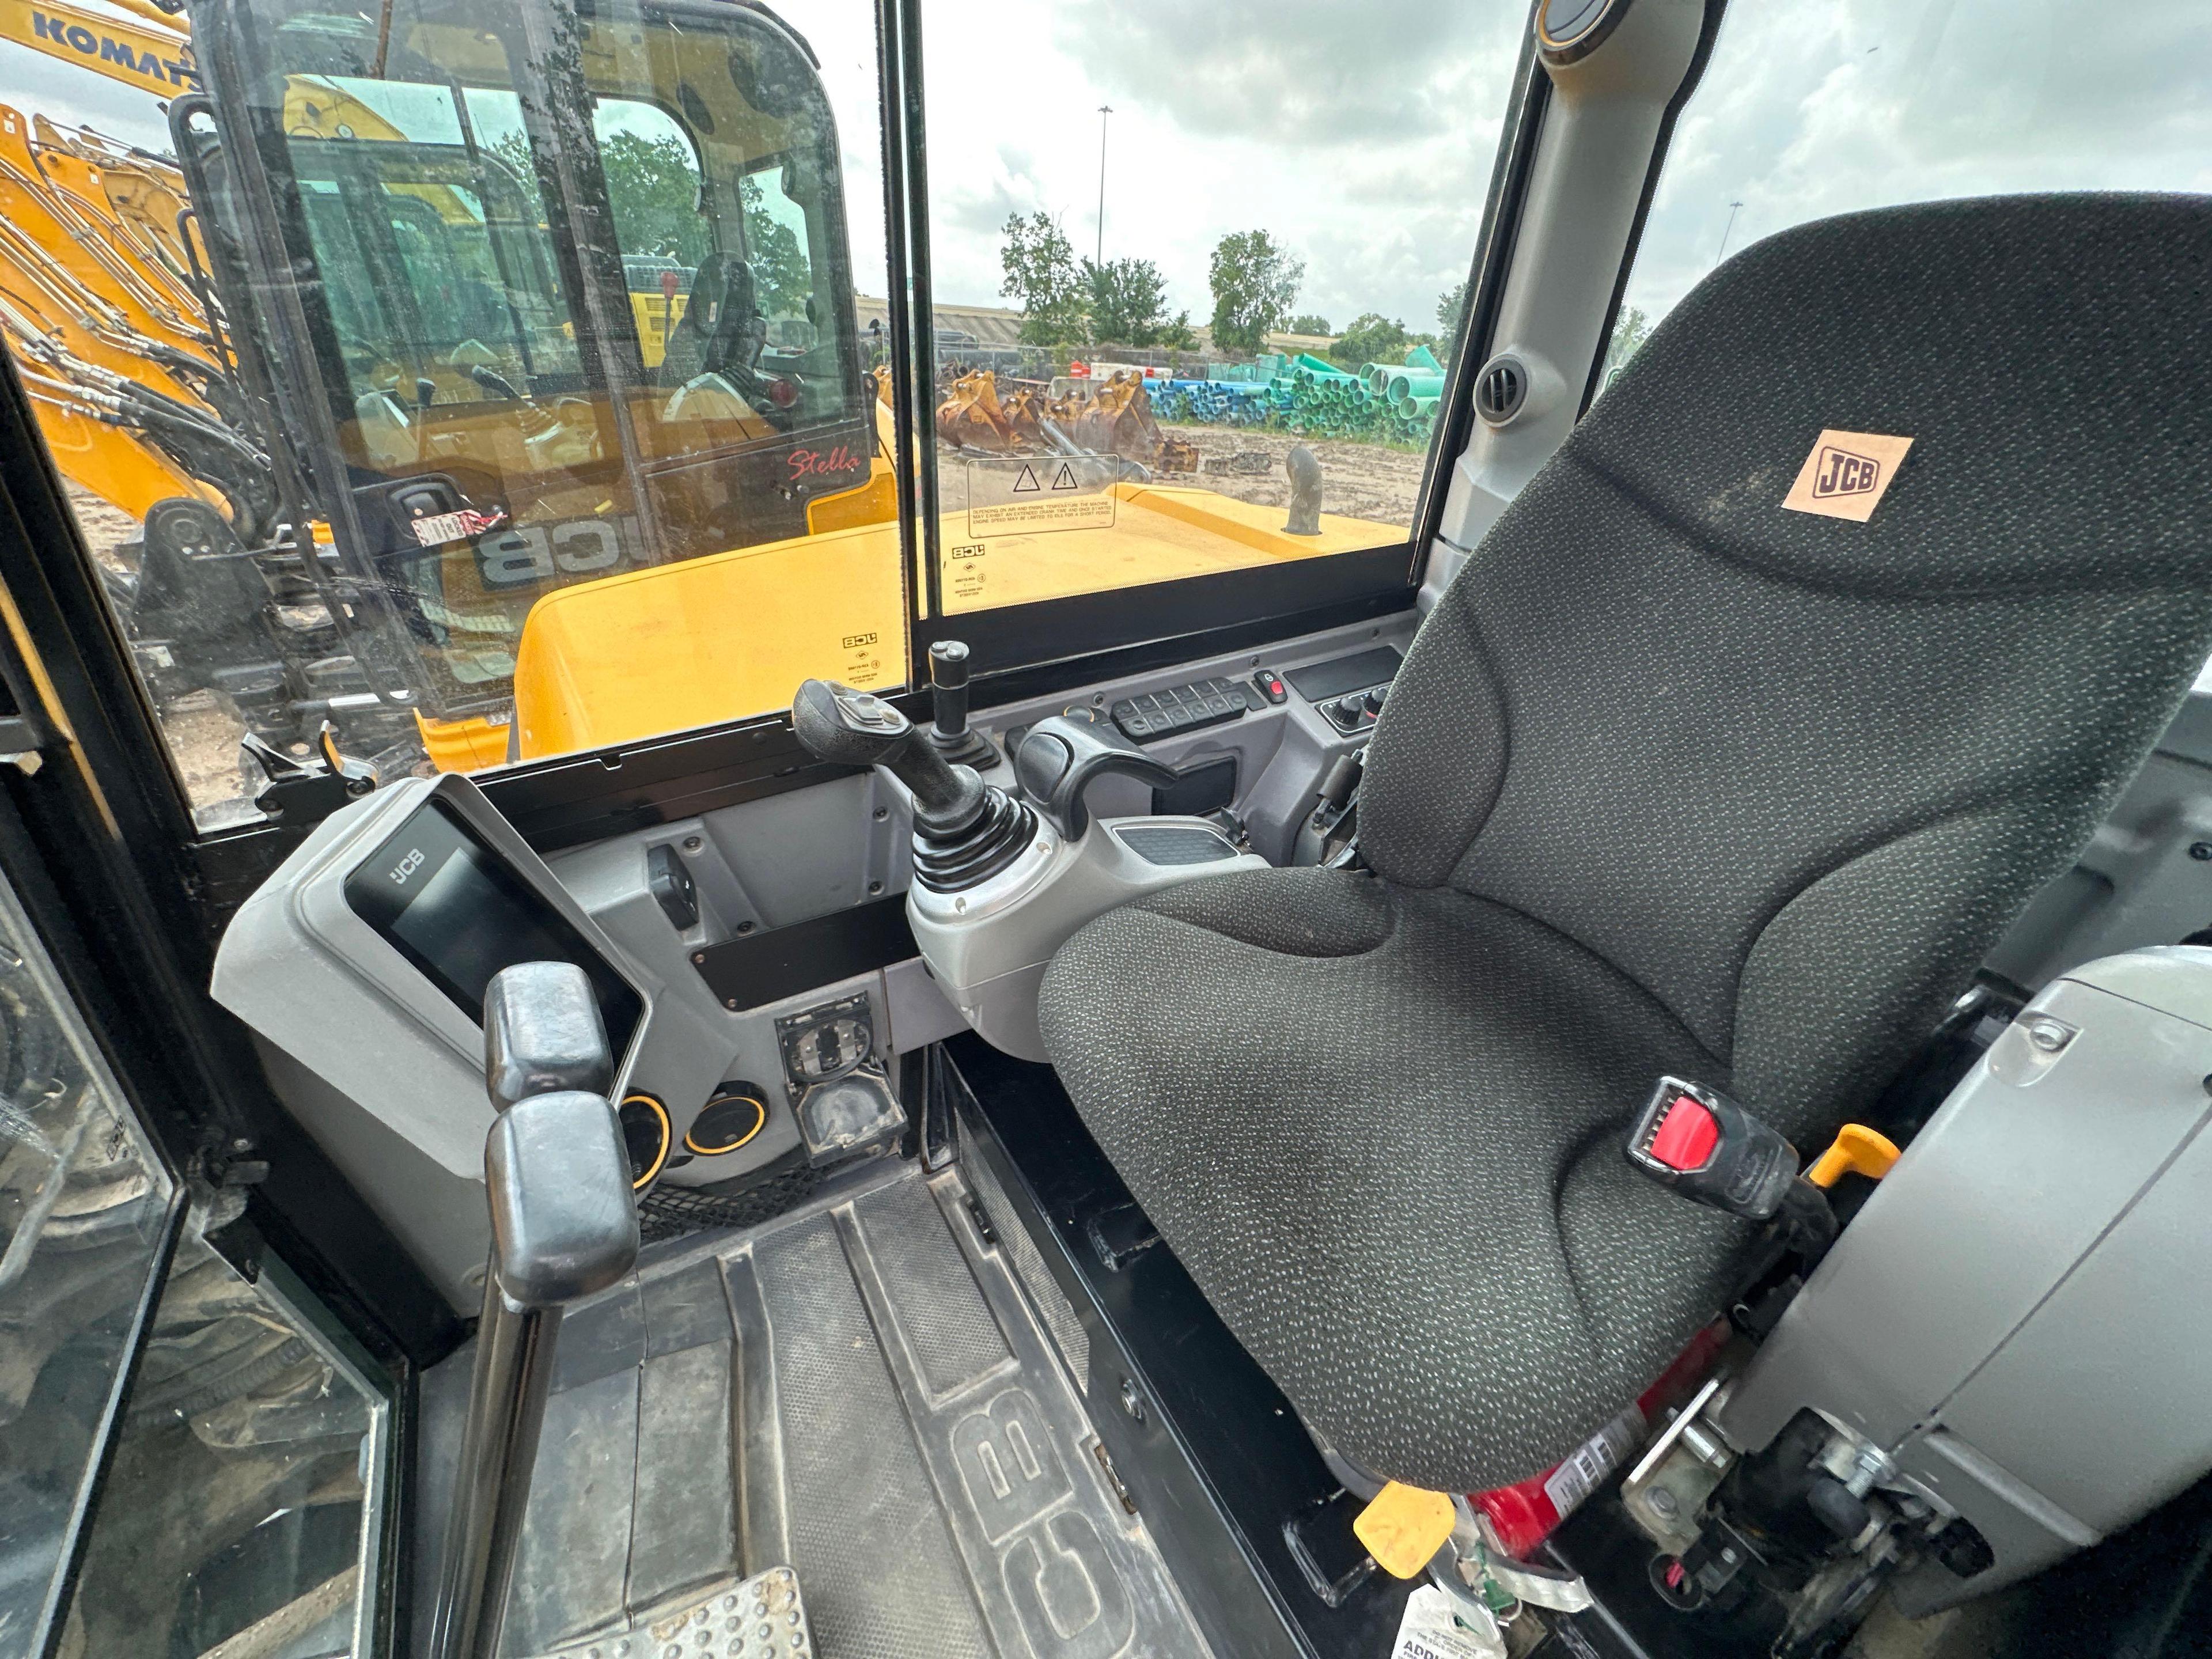 2022 JCB 85Z-2 HYDRAULIC EXCAVATOR powered by Kohler diesel engine, equipped with Cab, air, heat,